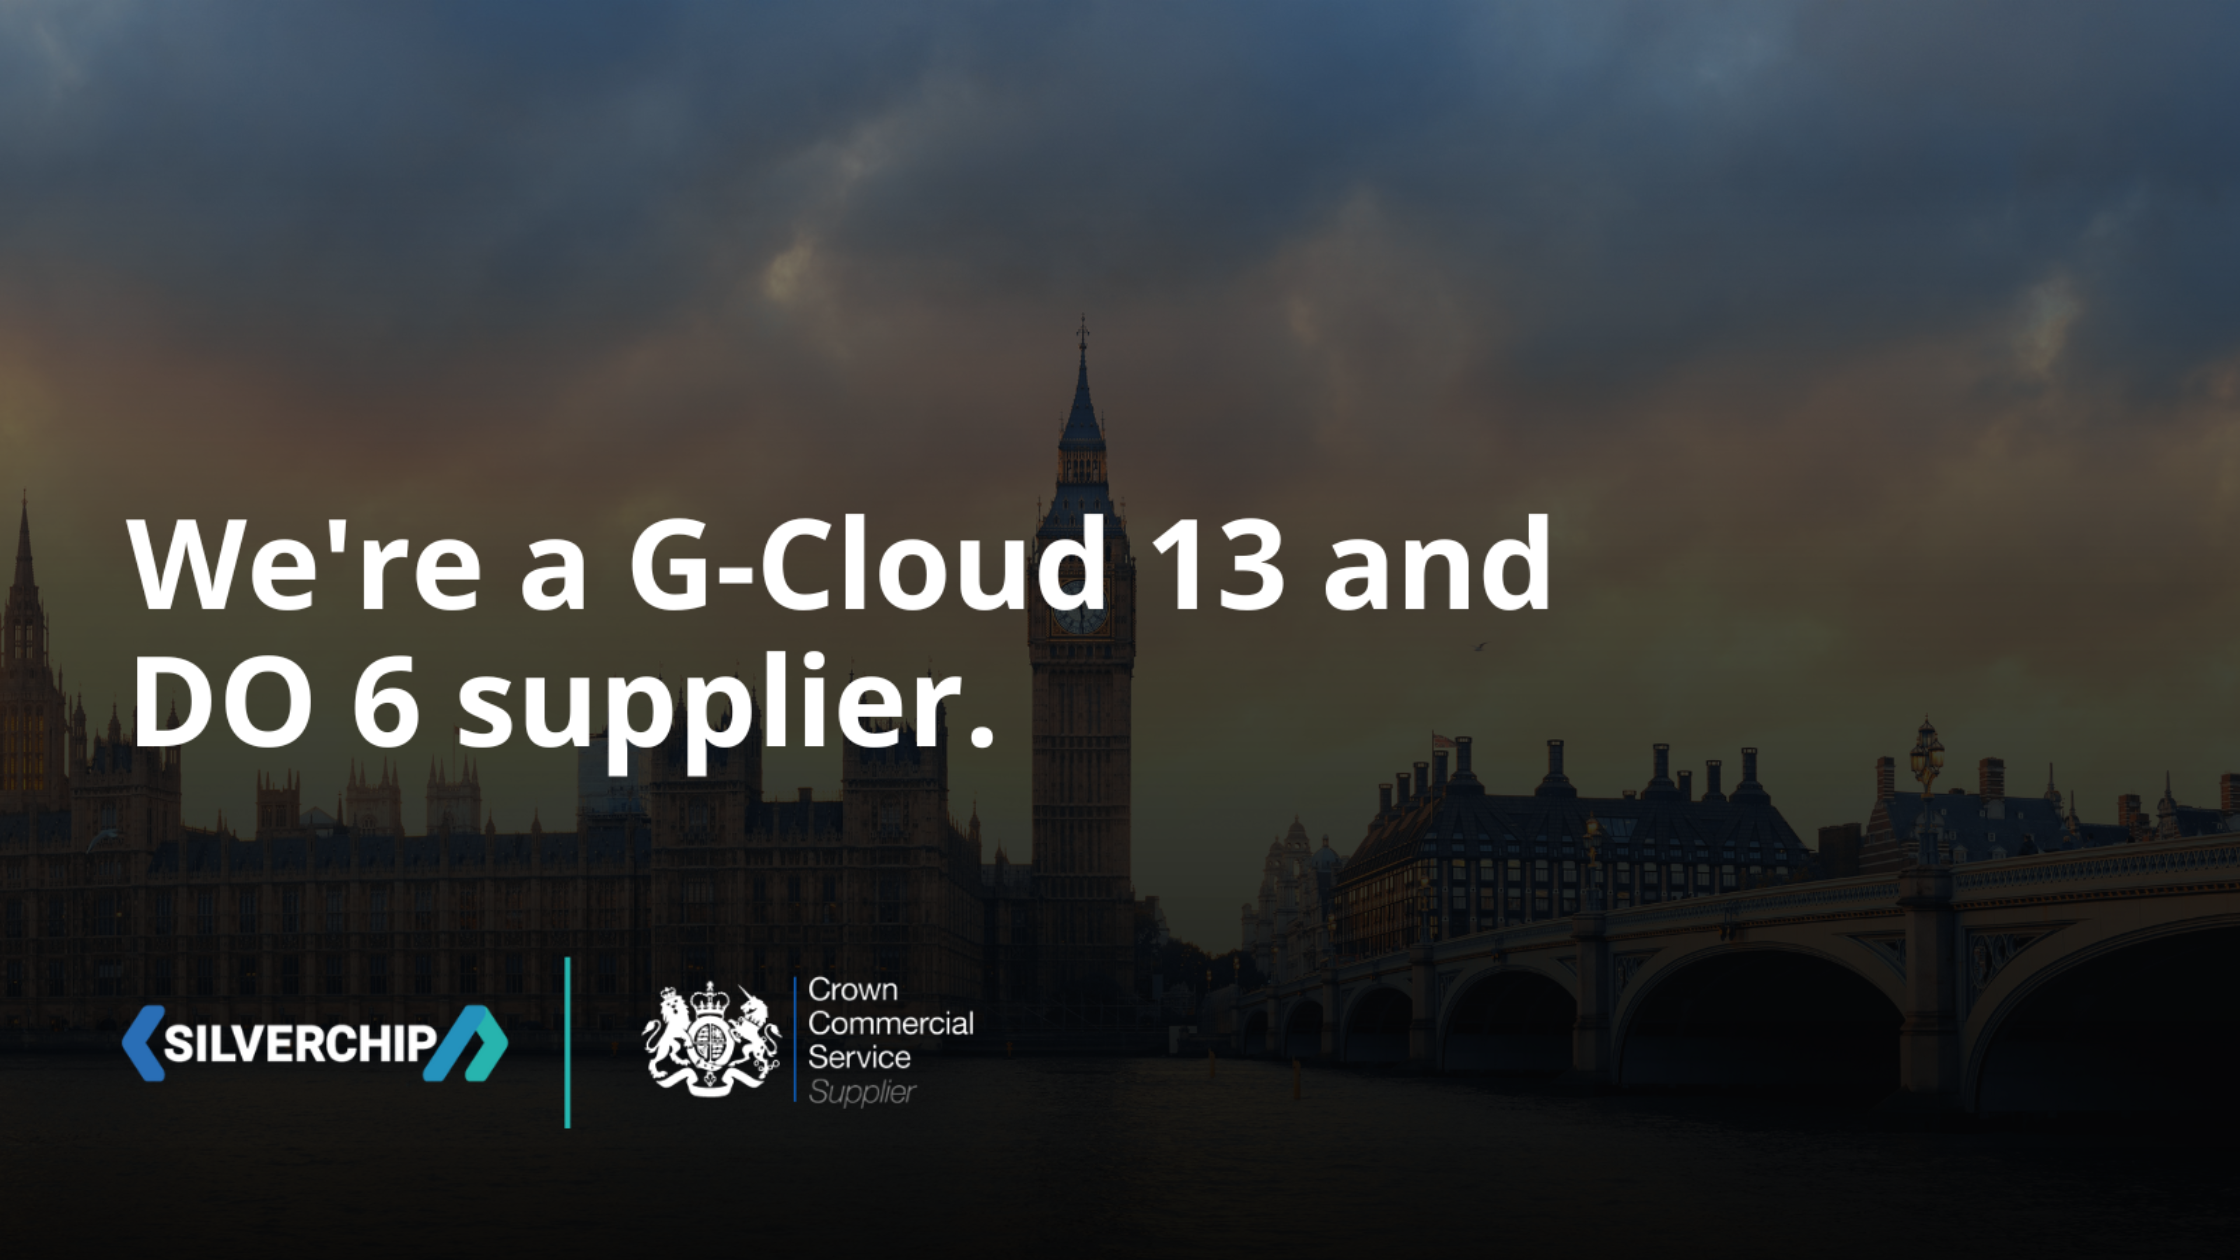 Silverchip Appointed to Government G-Cloud 13 Framework